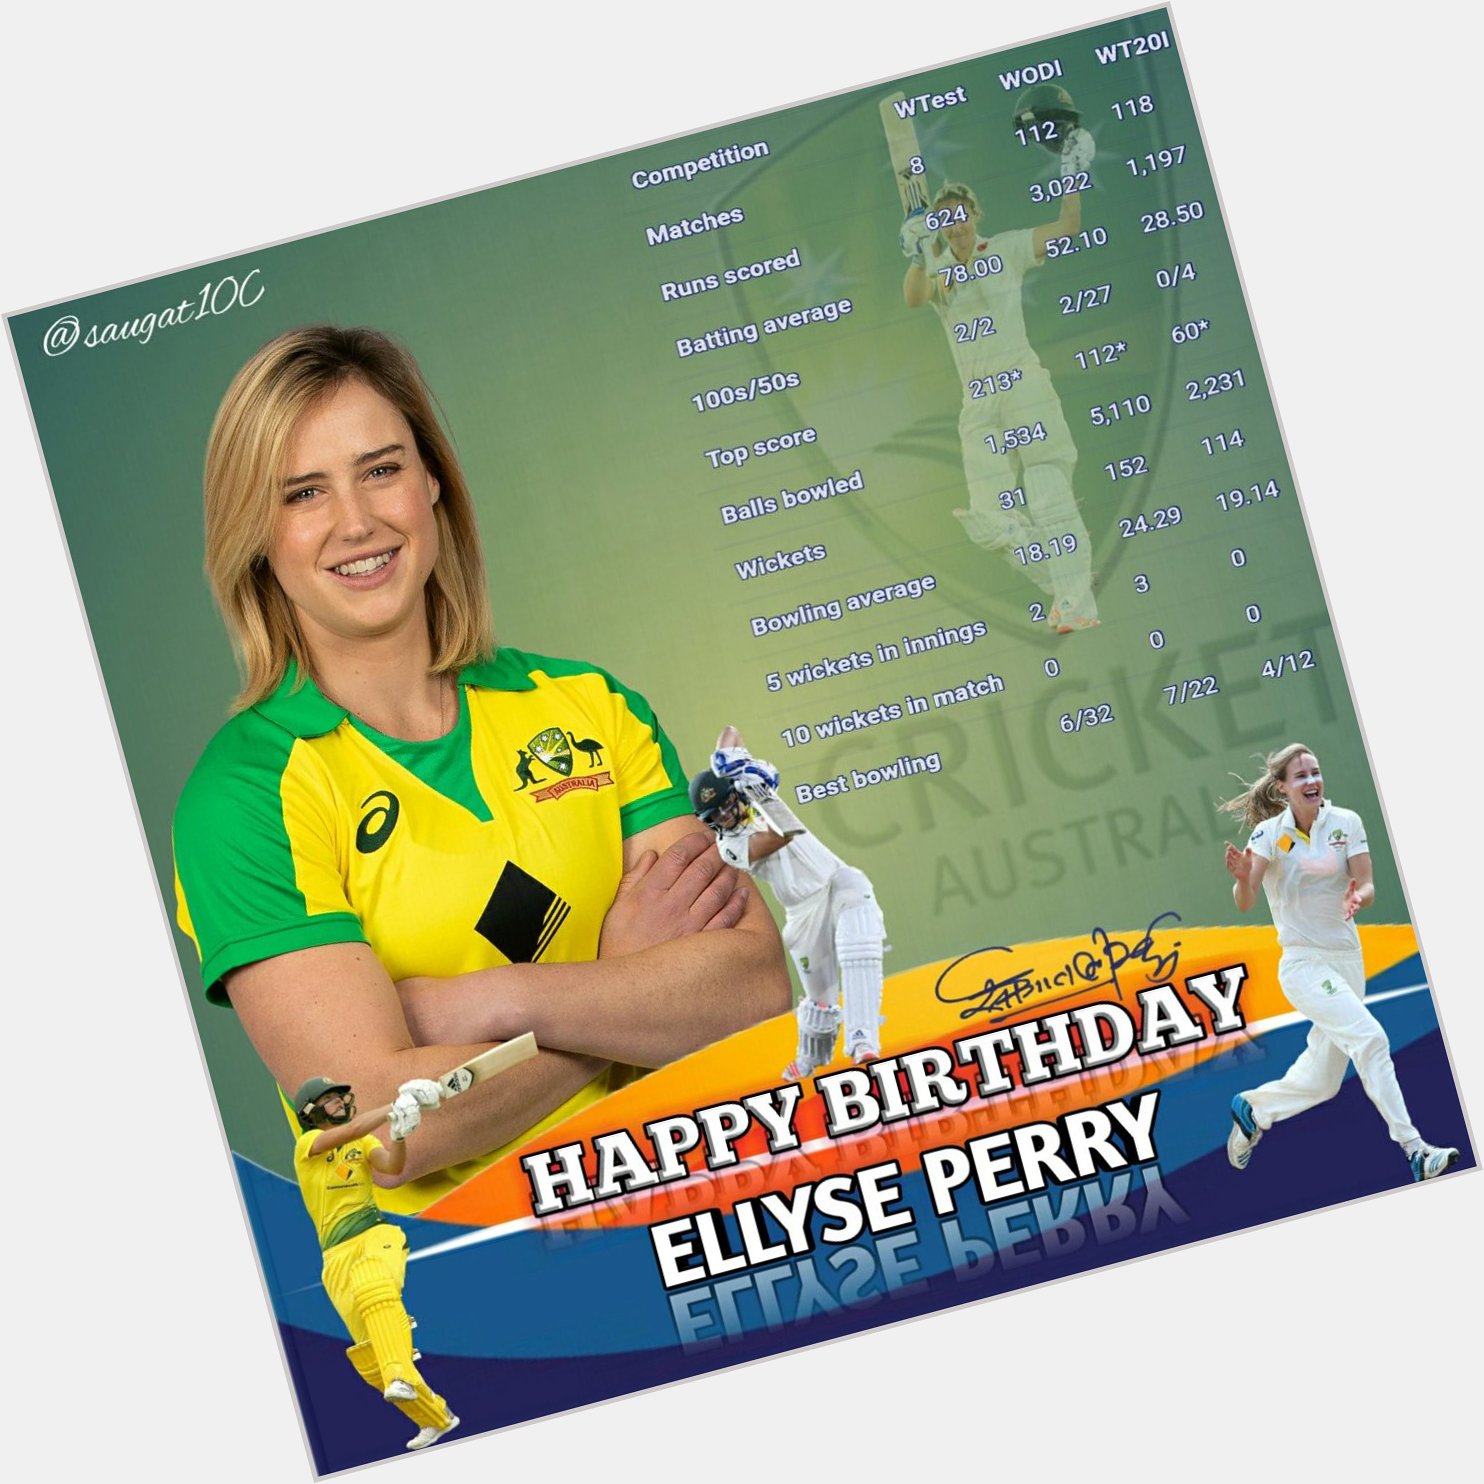 Brilliant with bat and ball, in every format!
Happy birthday, Ellyse Perry 